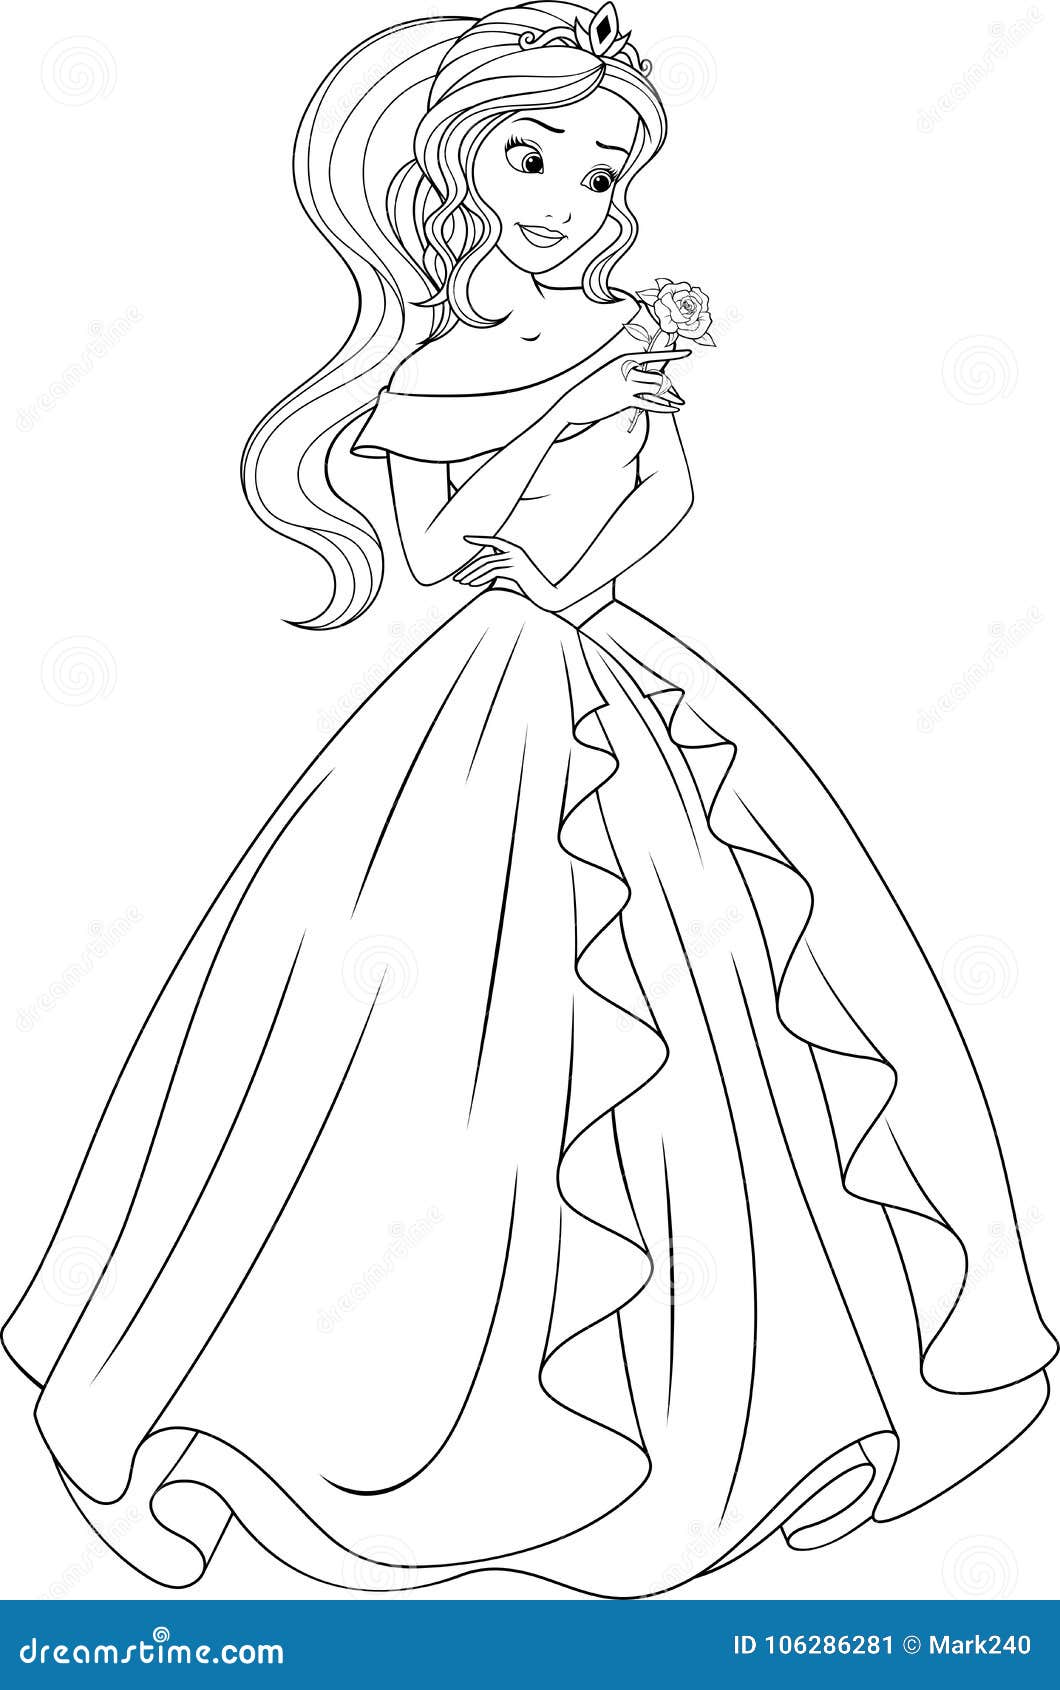 Coloring the Beautiful Princess Stock Vector   Illustration of ...